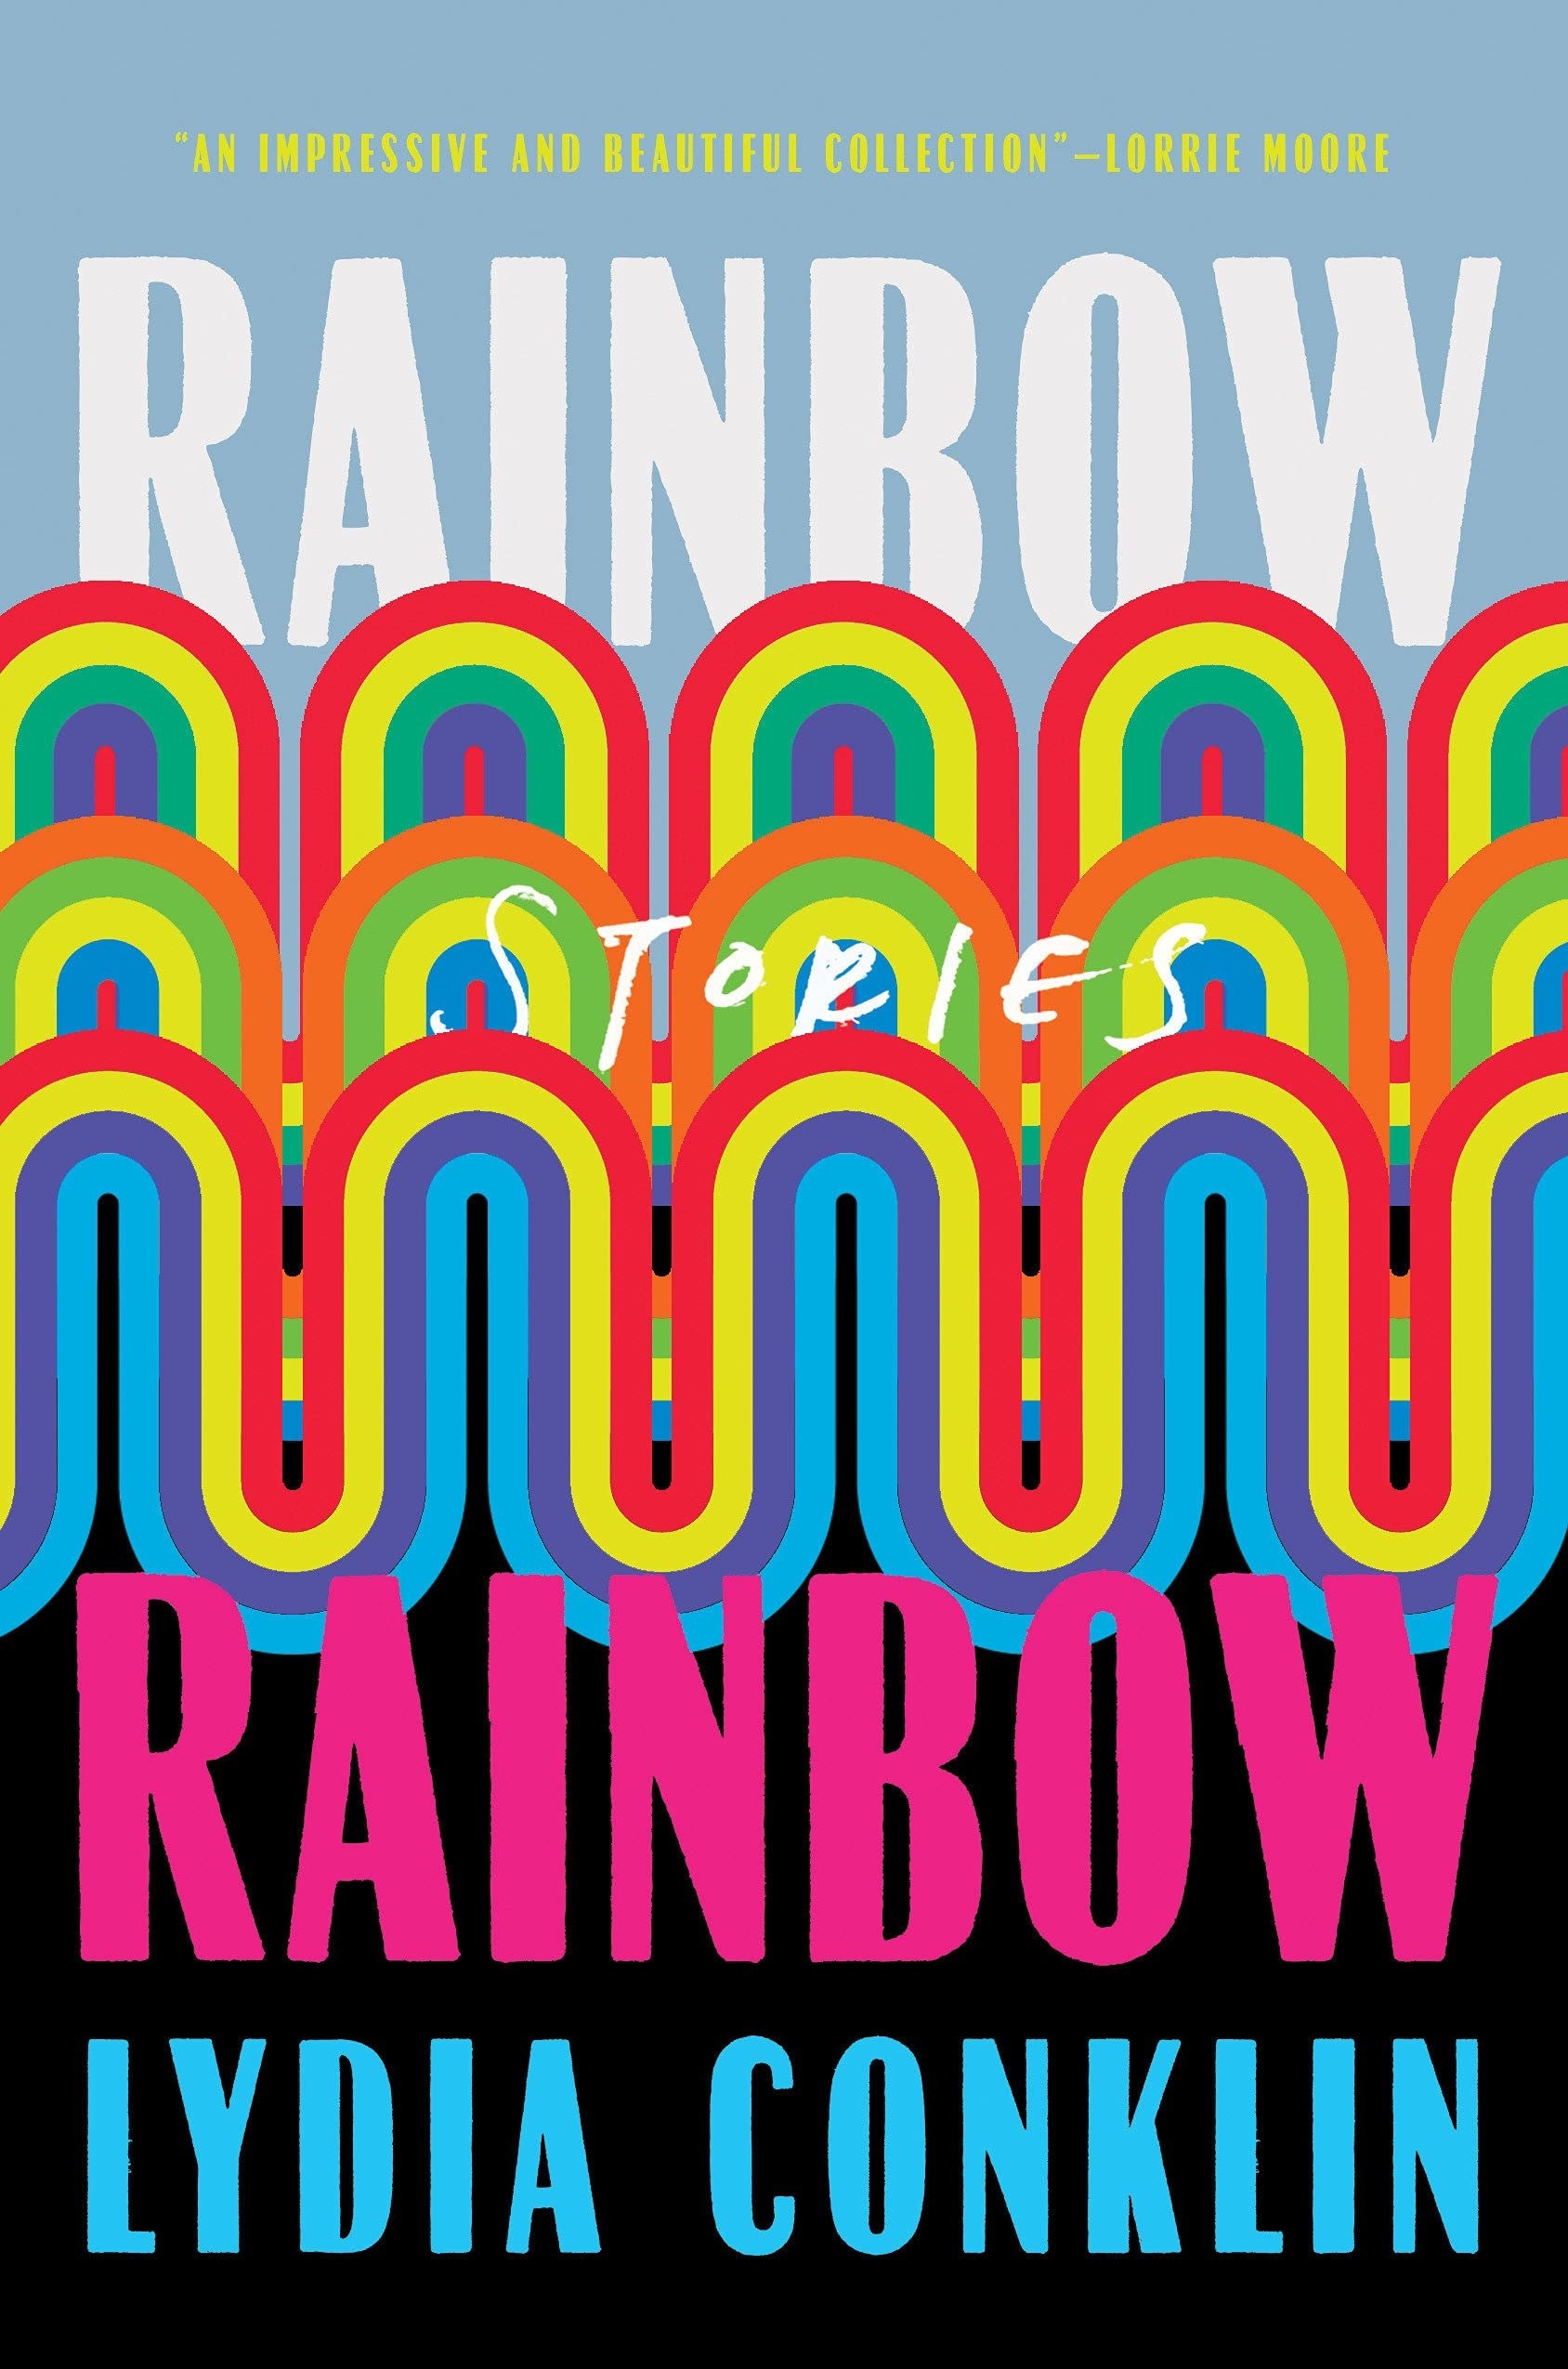 &quot;Rainbow Rainbow&quot; cover with loops of different colors between the words in the title